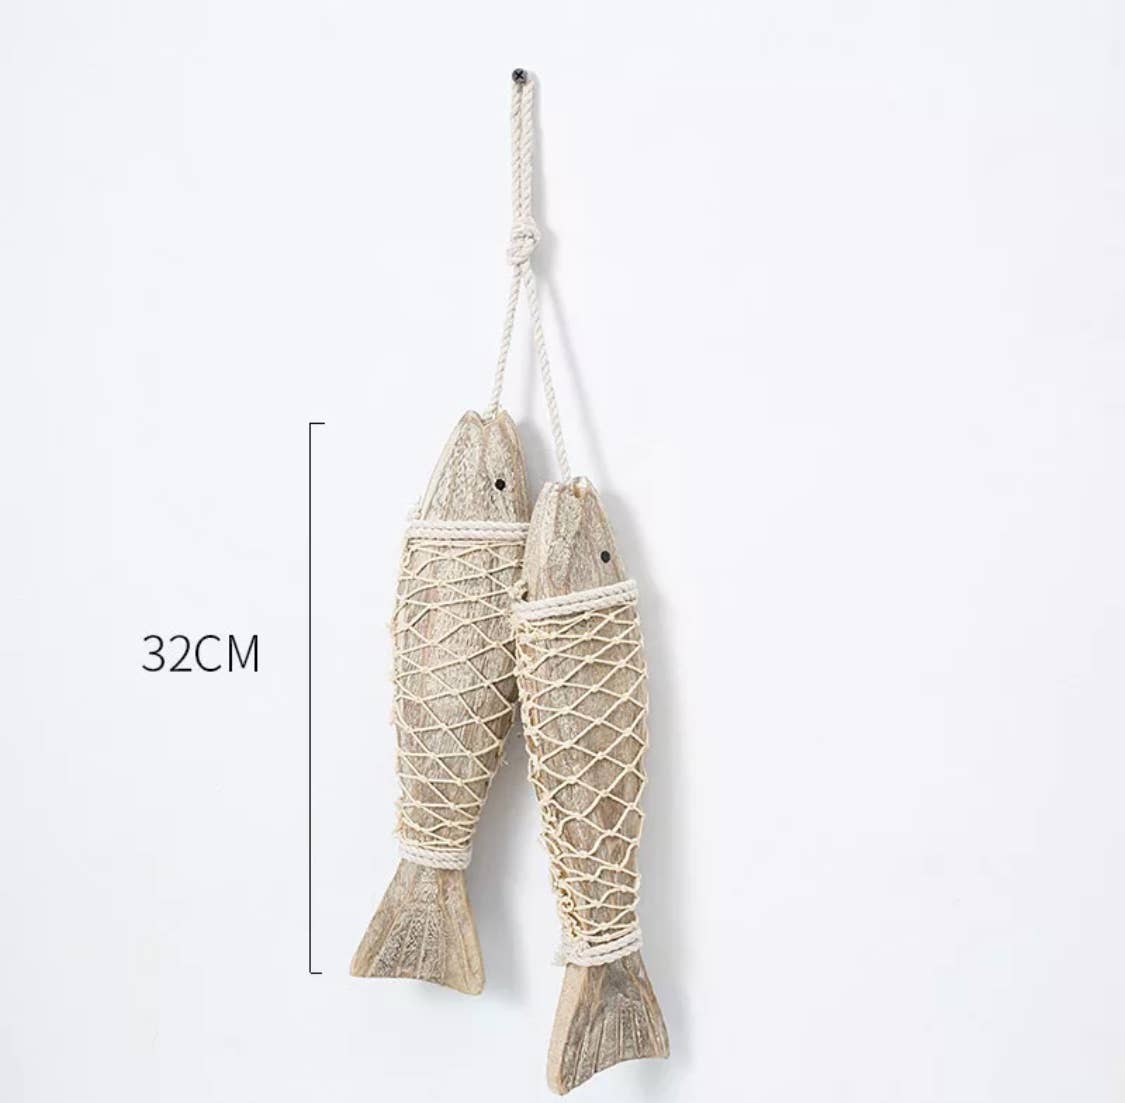 EcoFreax - wooden nautical rustic decor hanging fish in a net